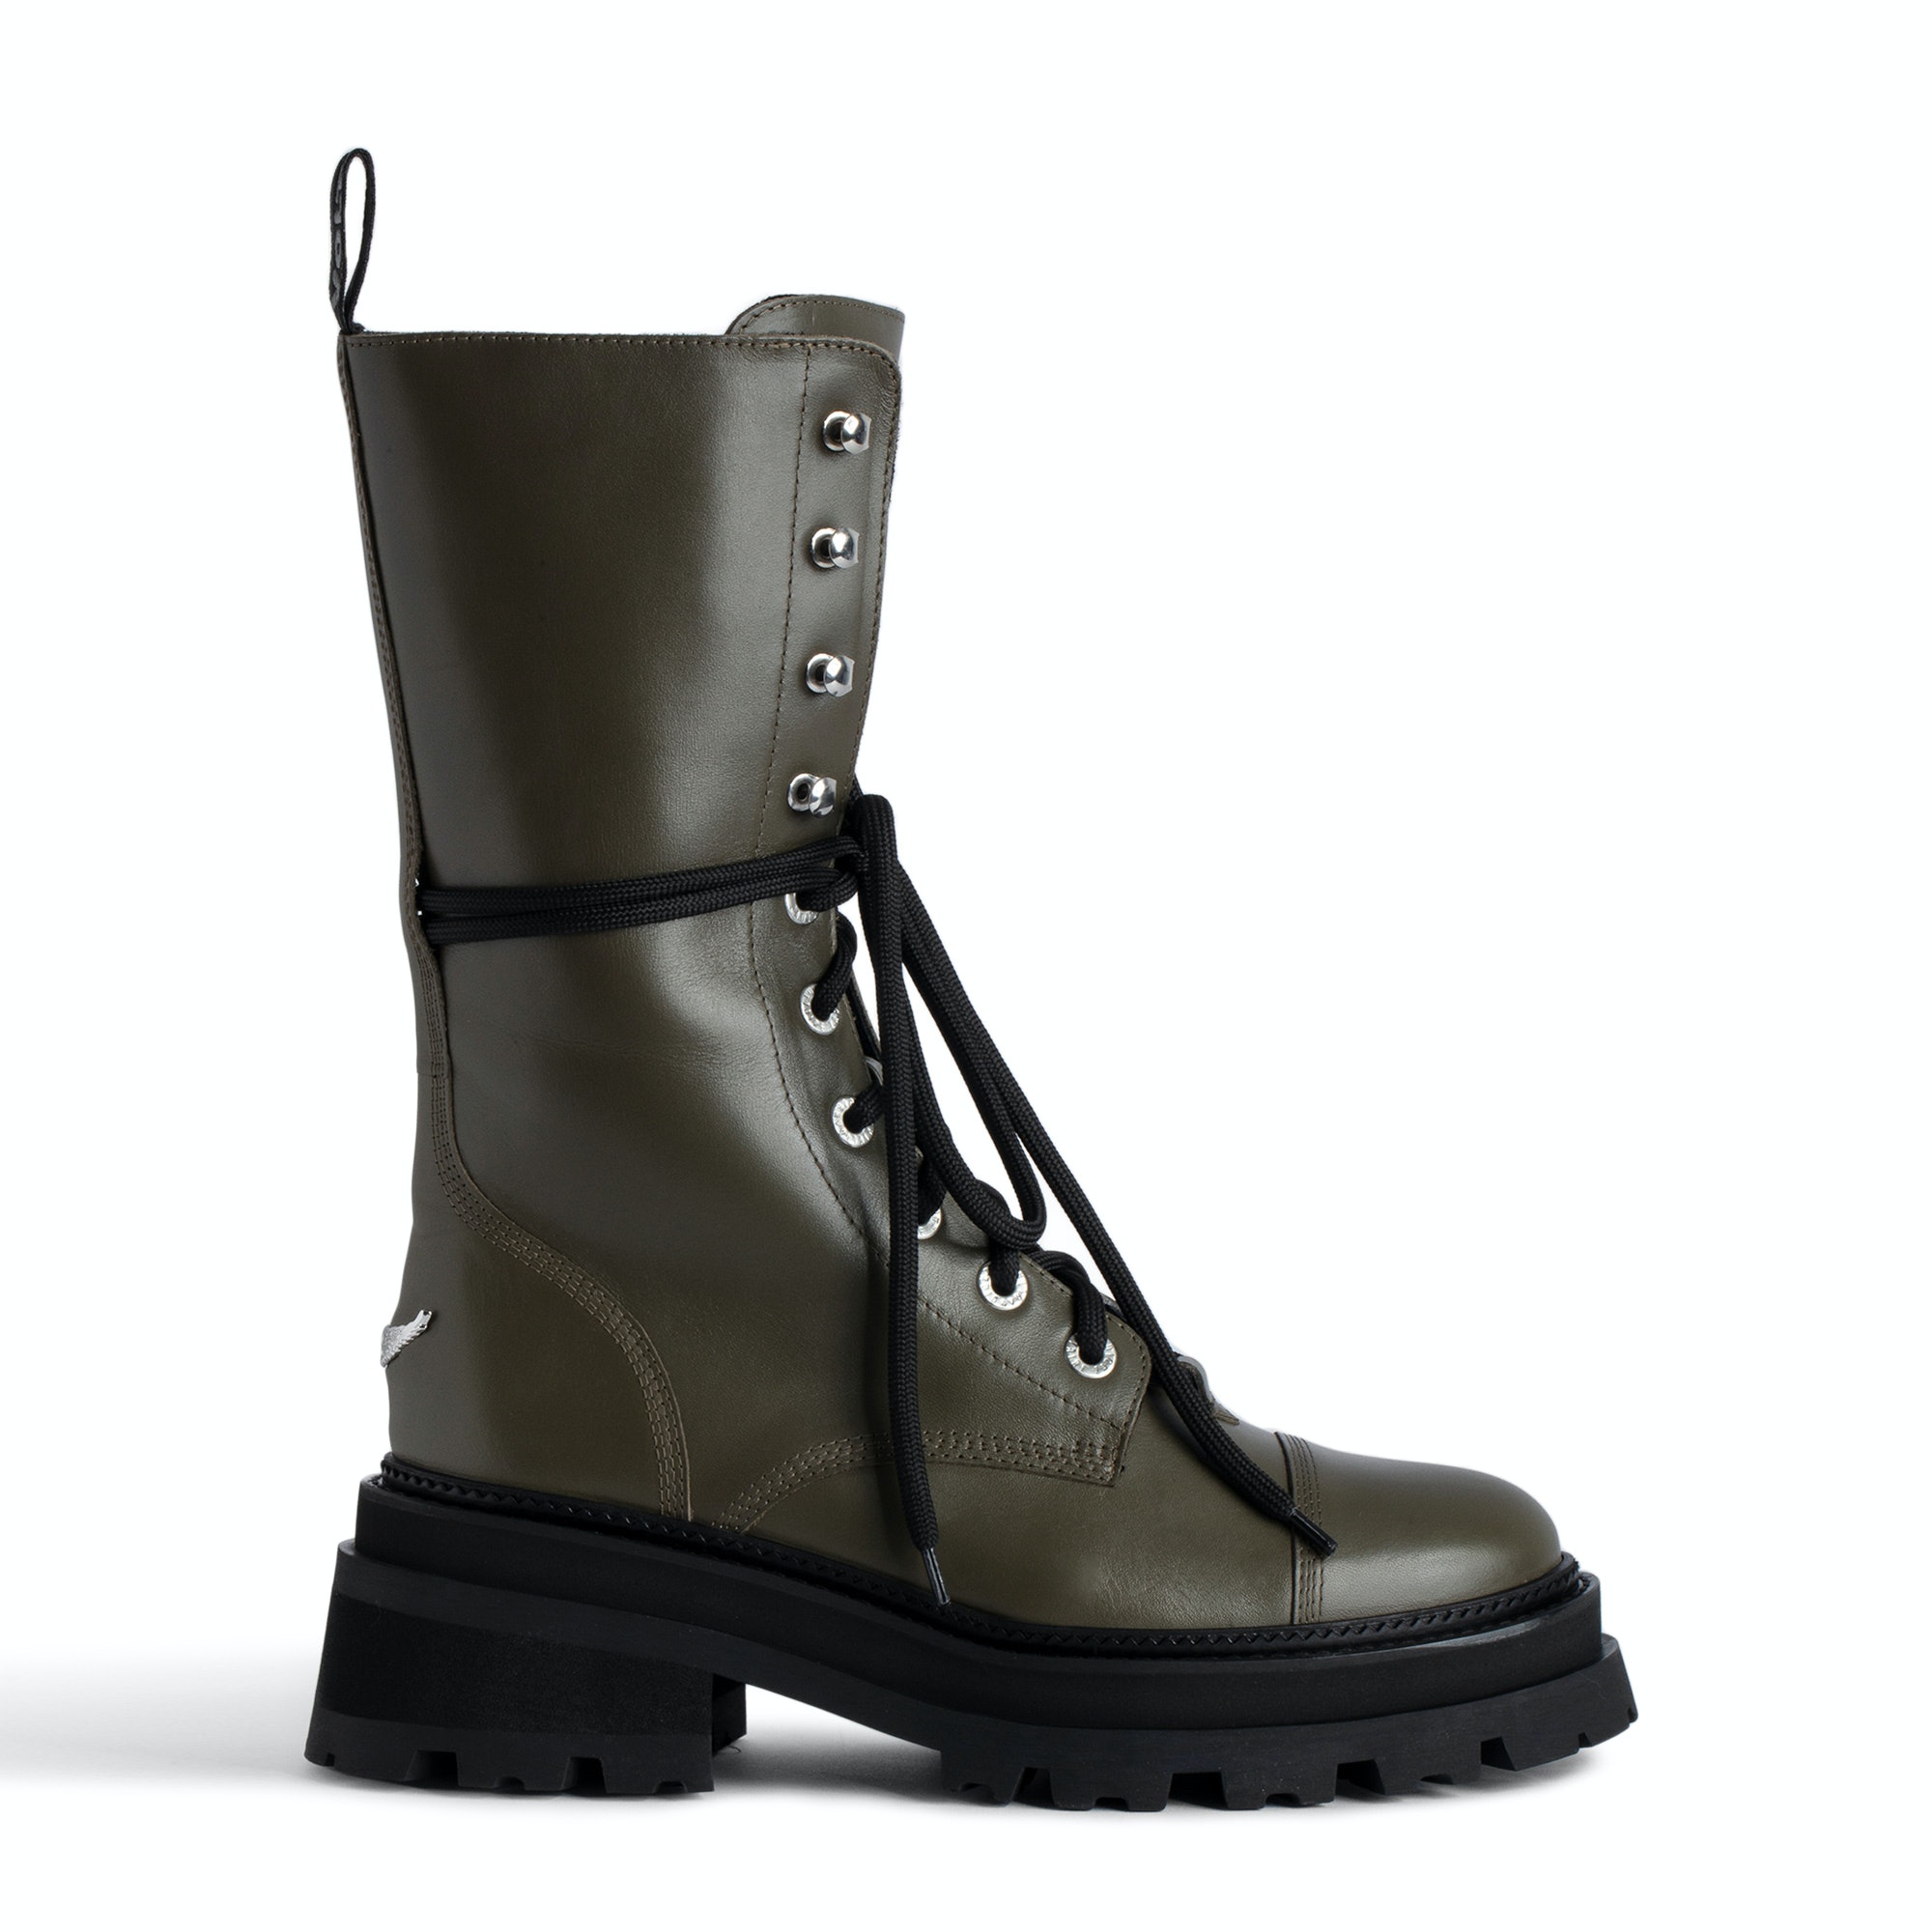 Bottines Montantes Ride Military - Taille 41 - Femme